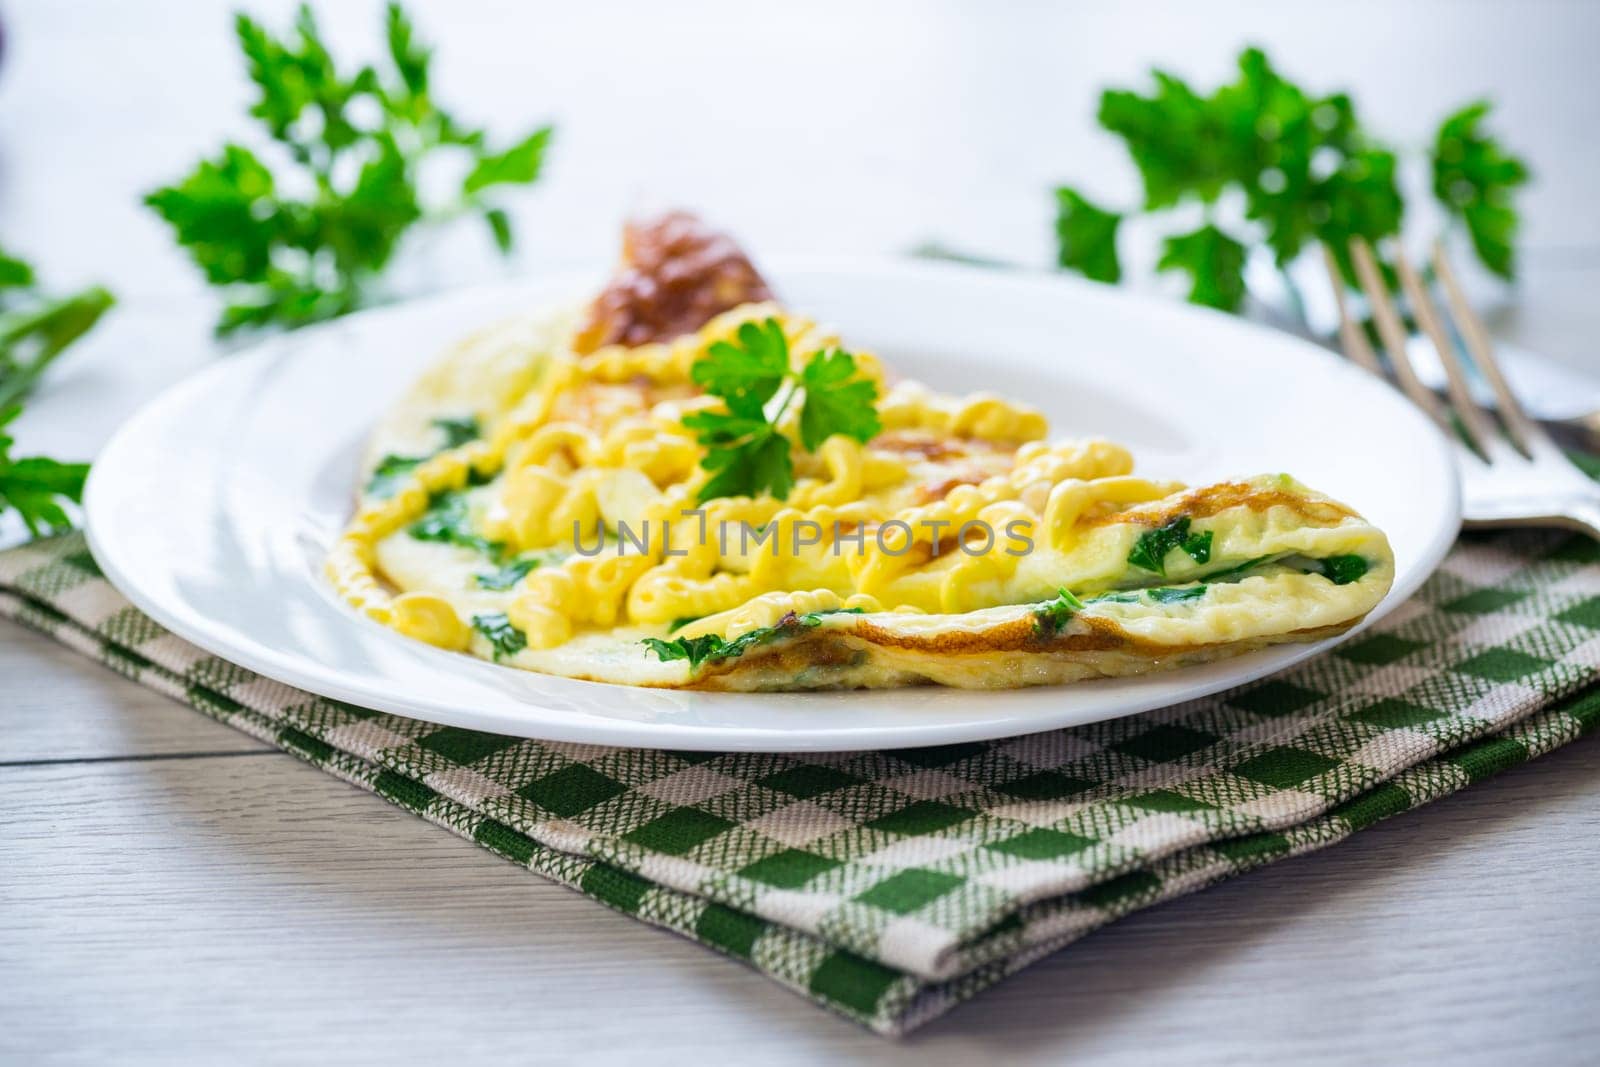 fried omelette stuffed with herbs, parsley, dill .